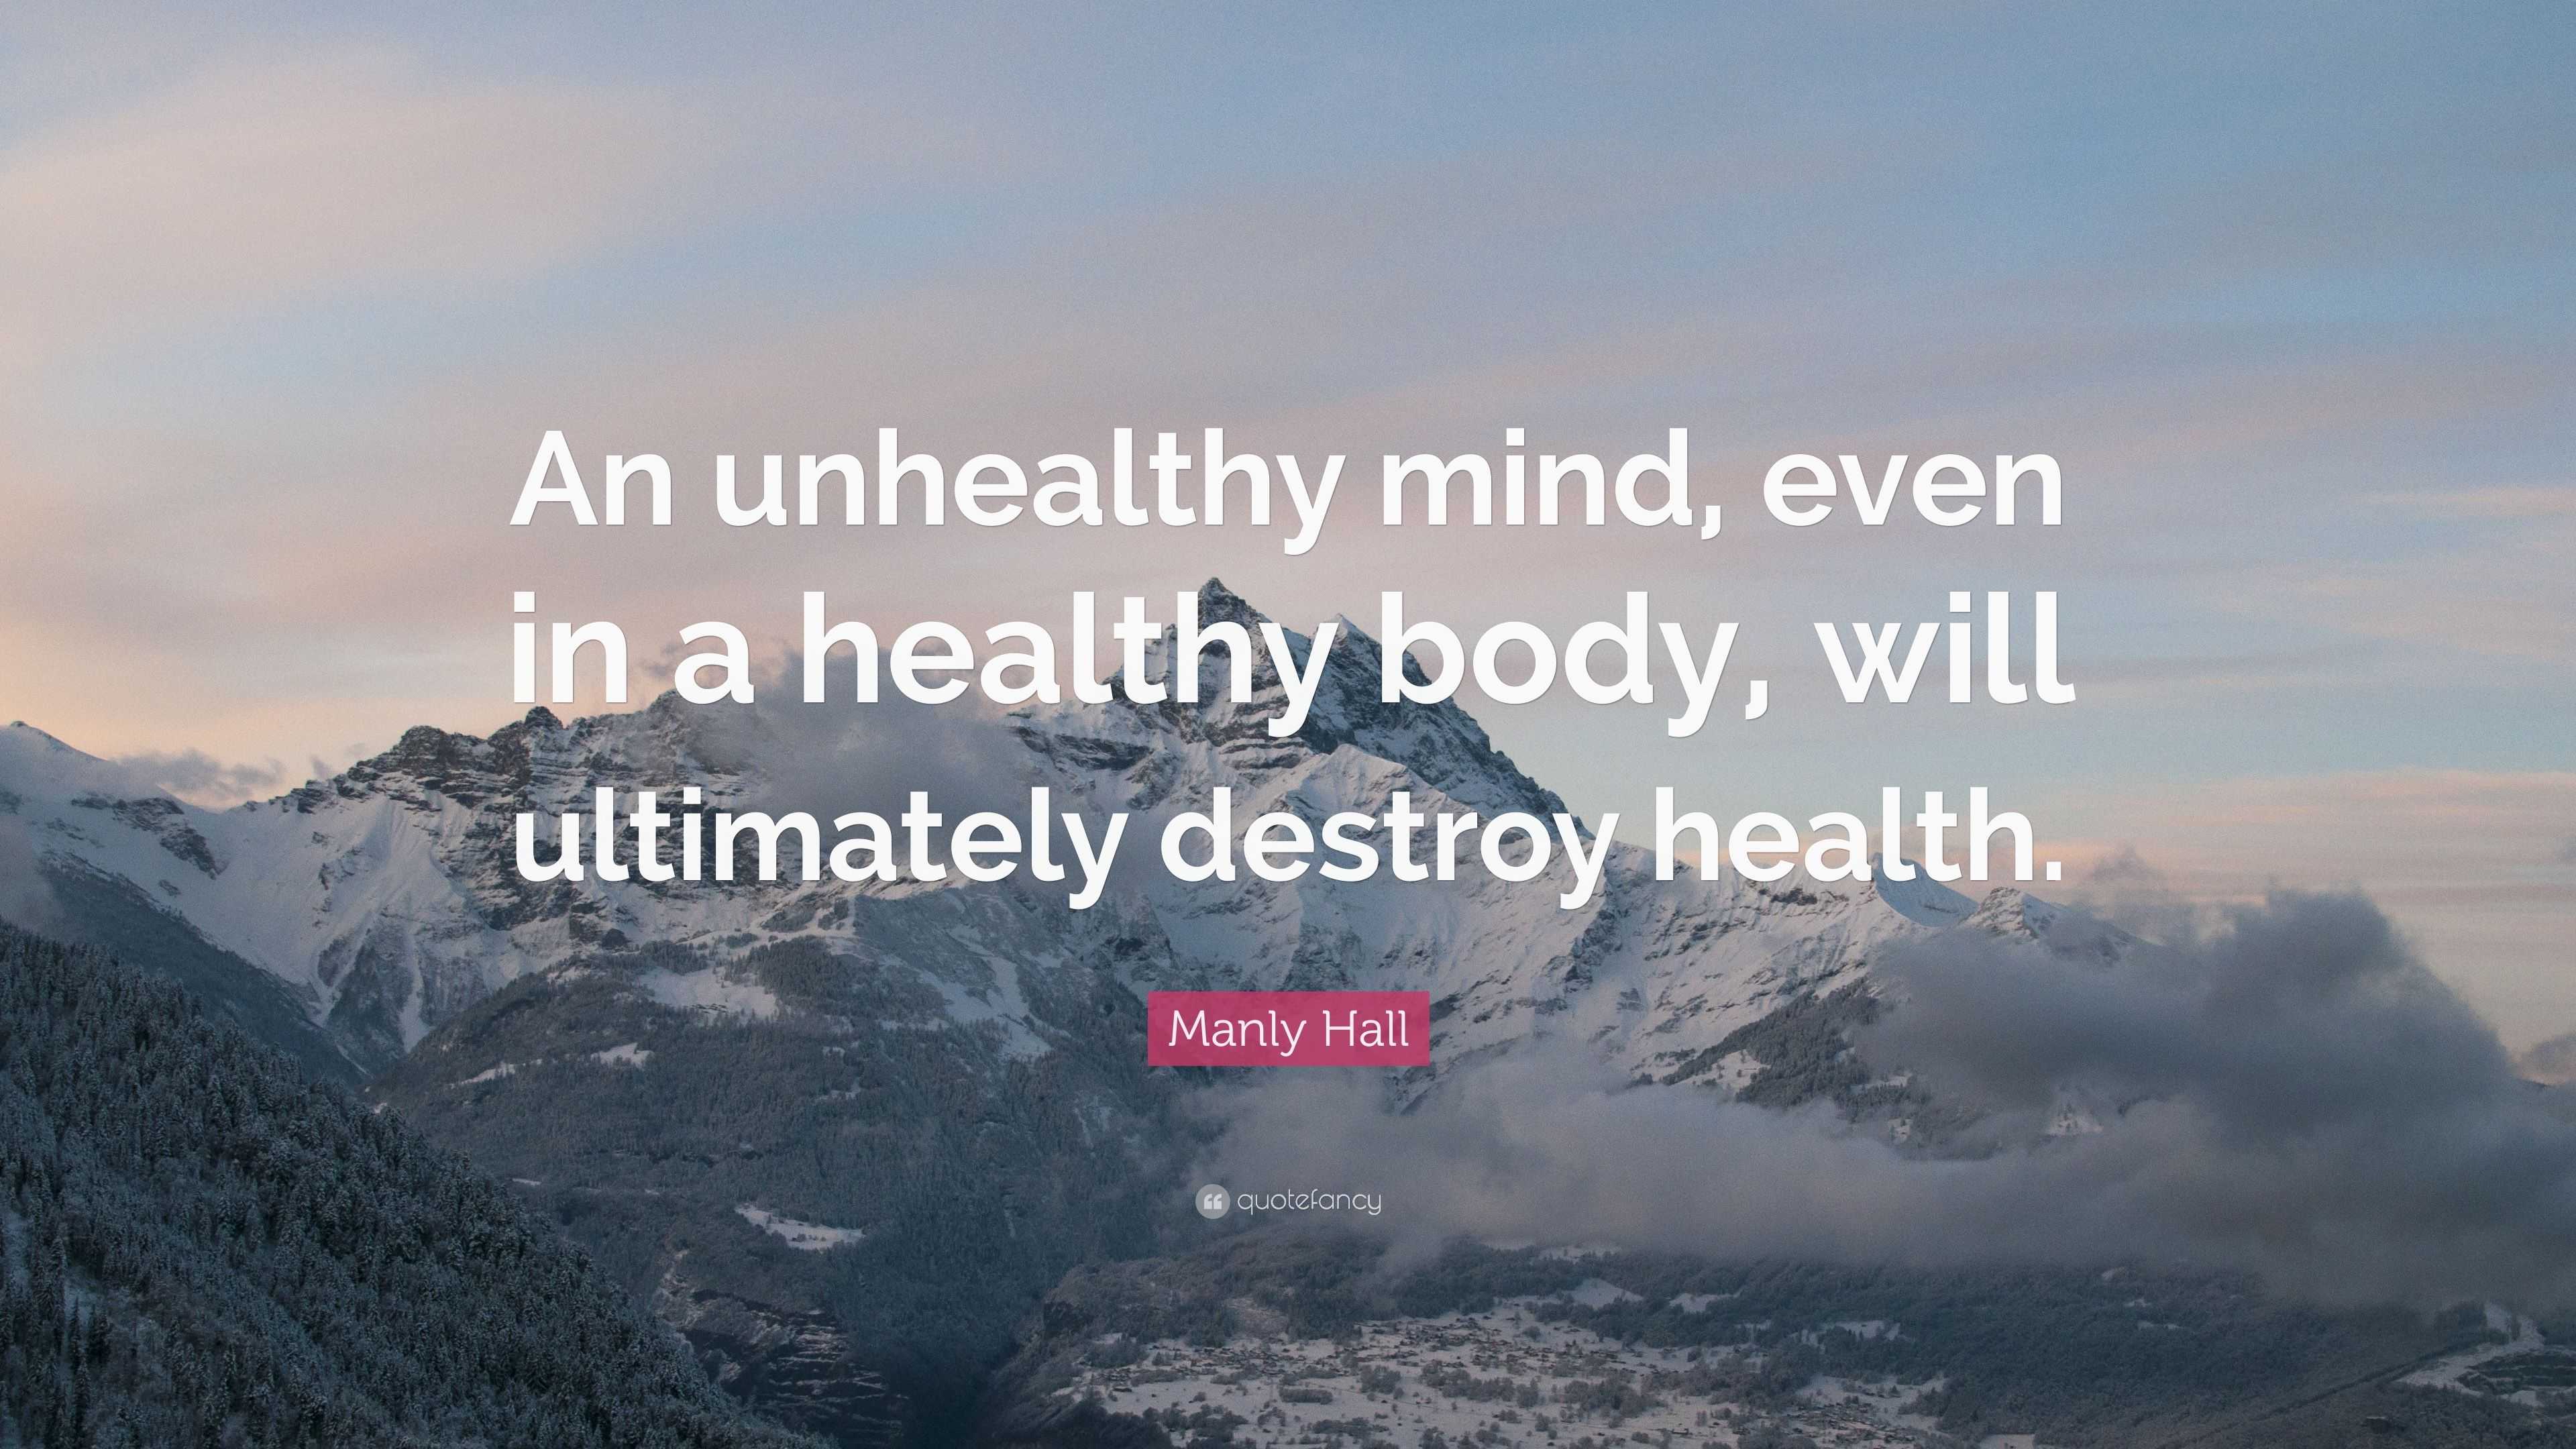 Manly Hall Quote: “An unhealthy mind, even in a healthy body, will